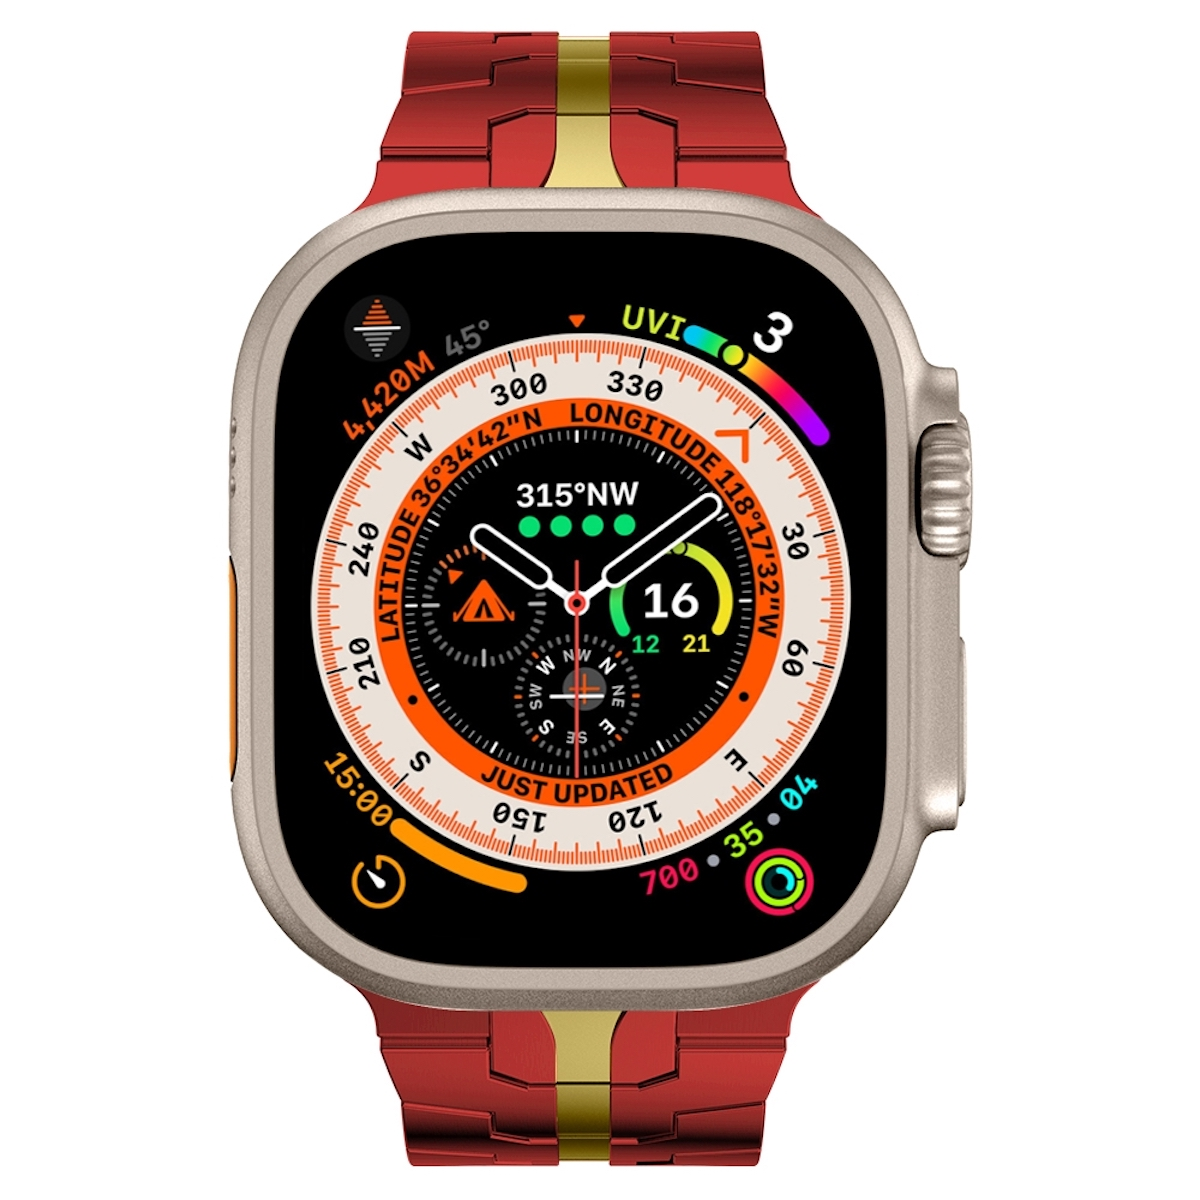 8 45 Band, WIGENTO Deluxe 1 Series 4 + 7 / Ersatzarmband, 1 / 42mm, 49mm 3 Gold 6 2 SE Ultra 44 2 5 Apple, 9 Rot Watch / Stahl